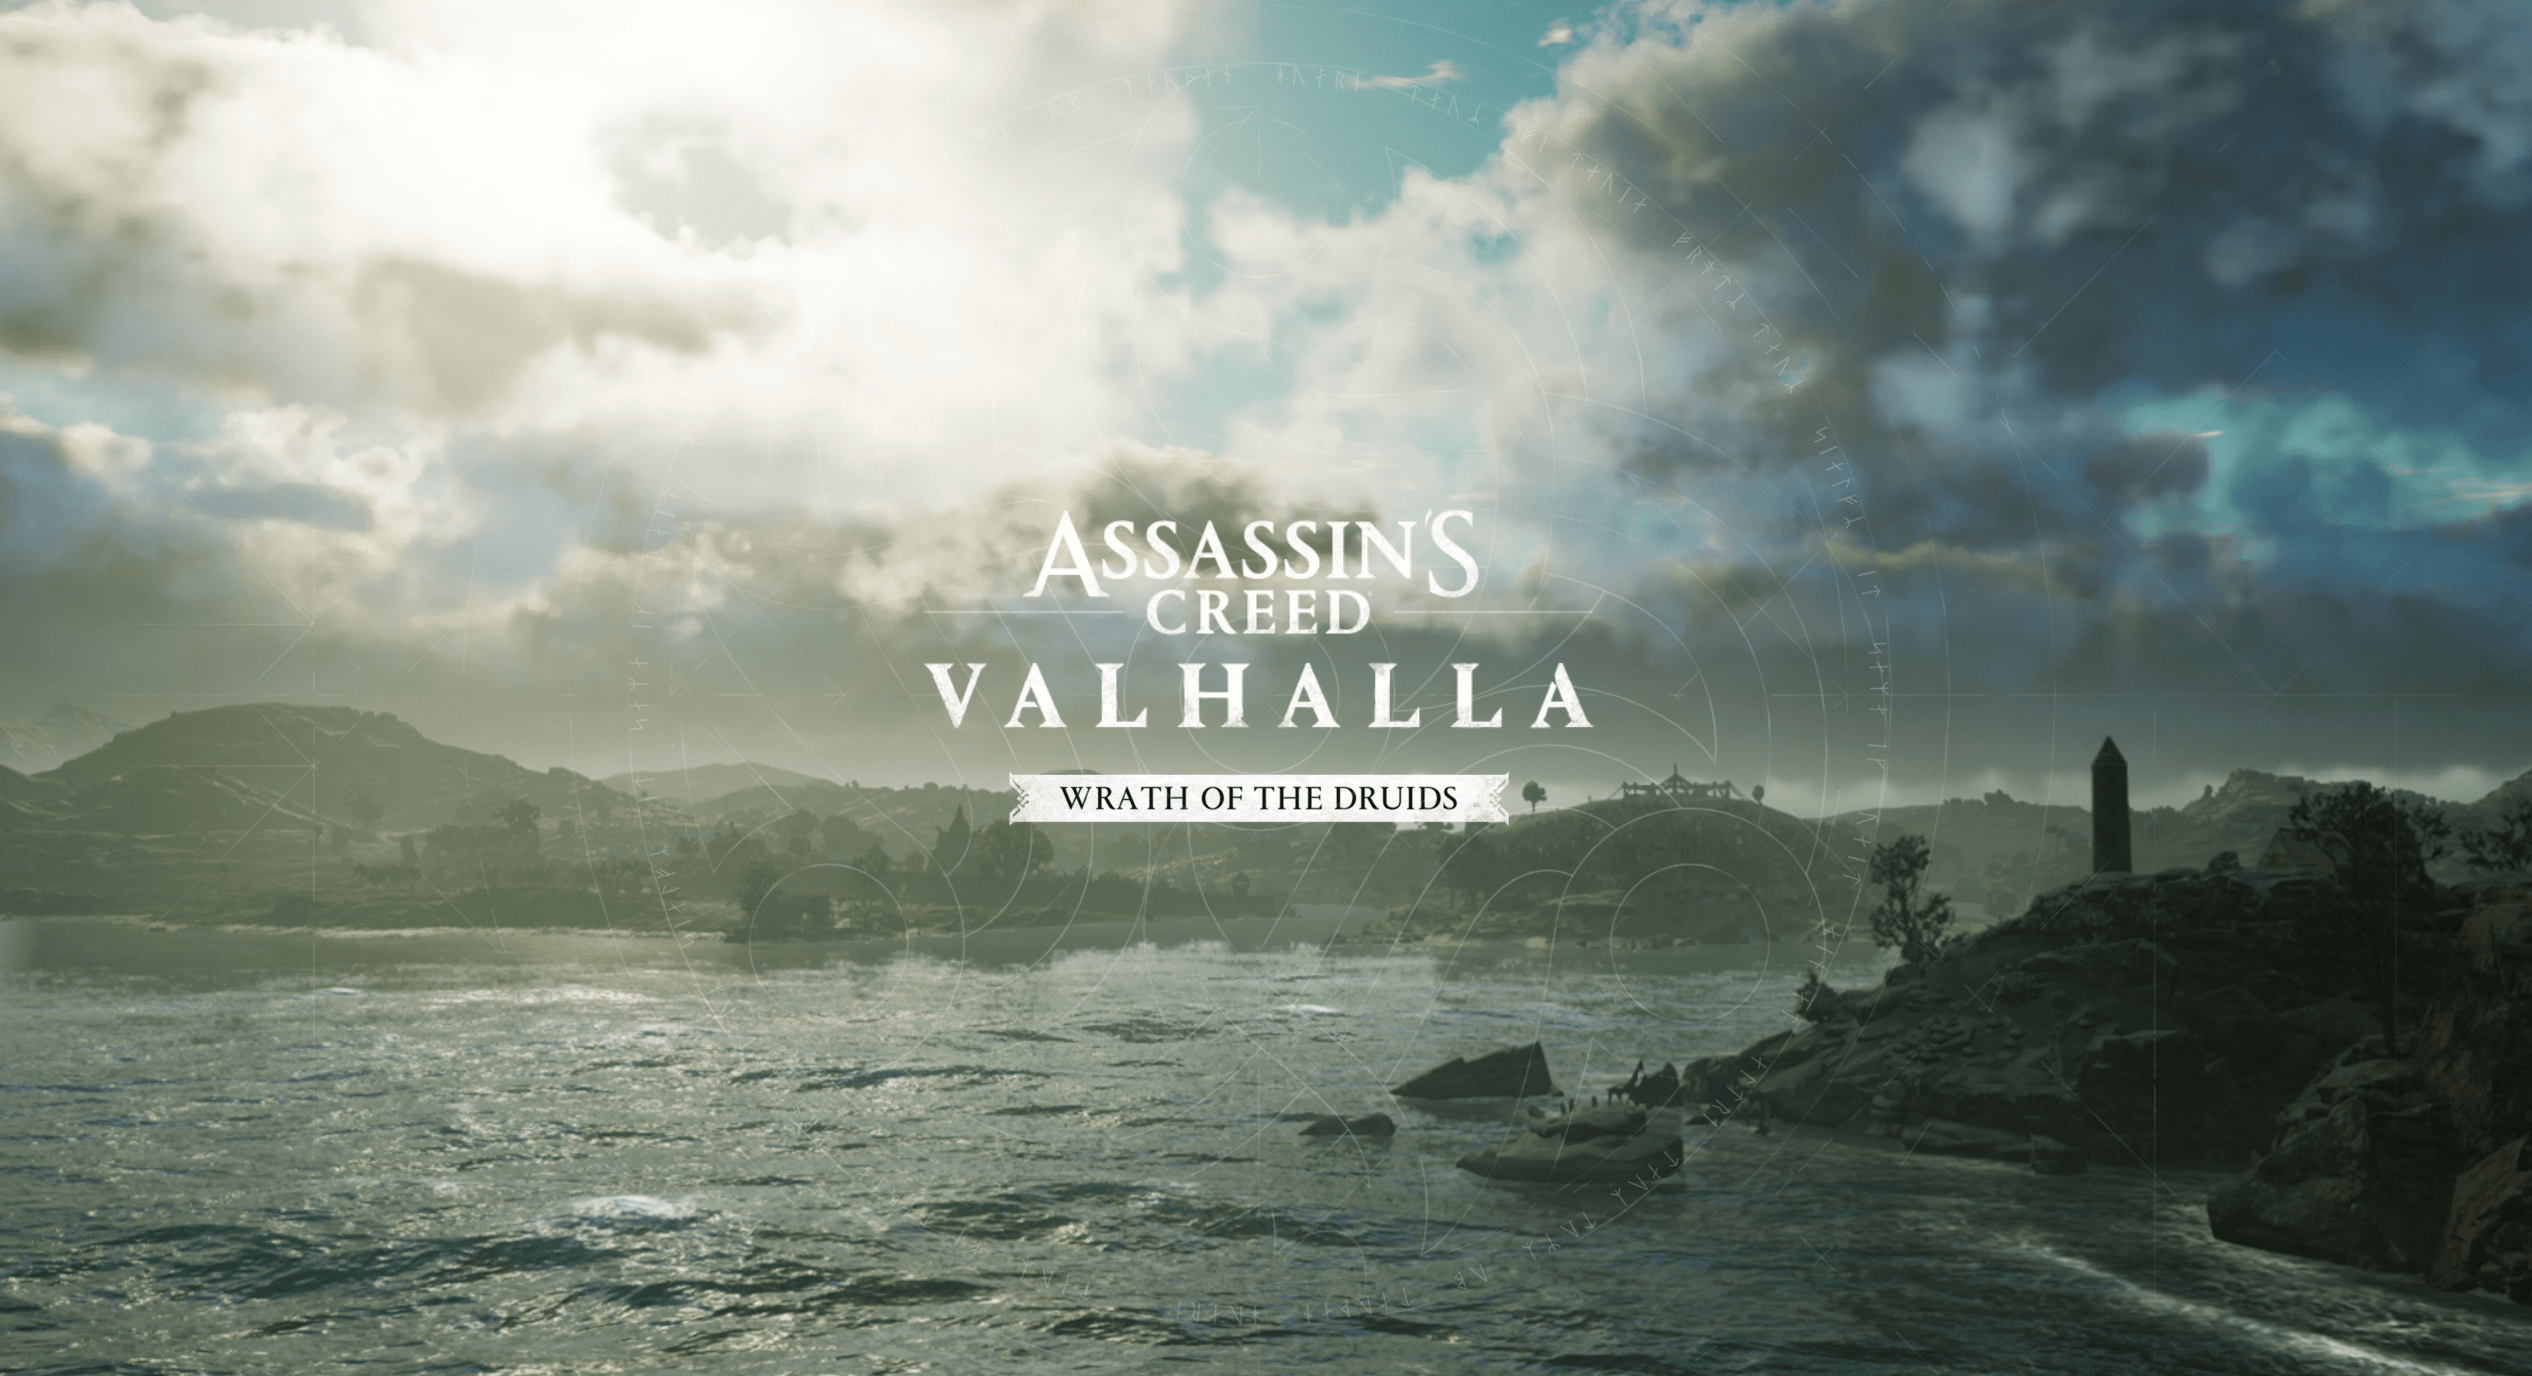 Assassins Creed Valhalla: Wrath of the Druids Review